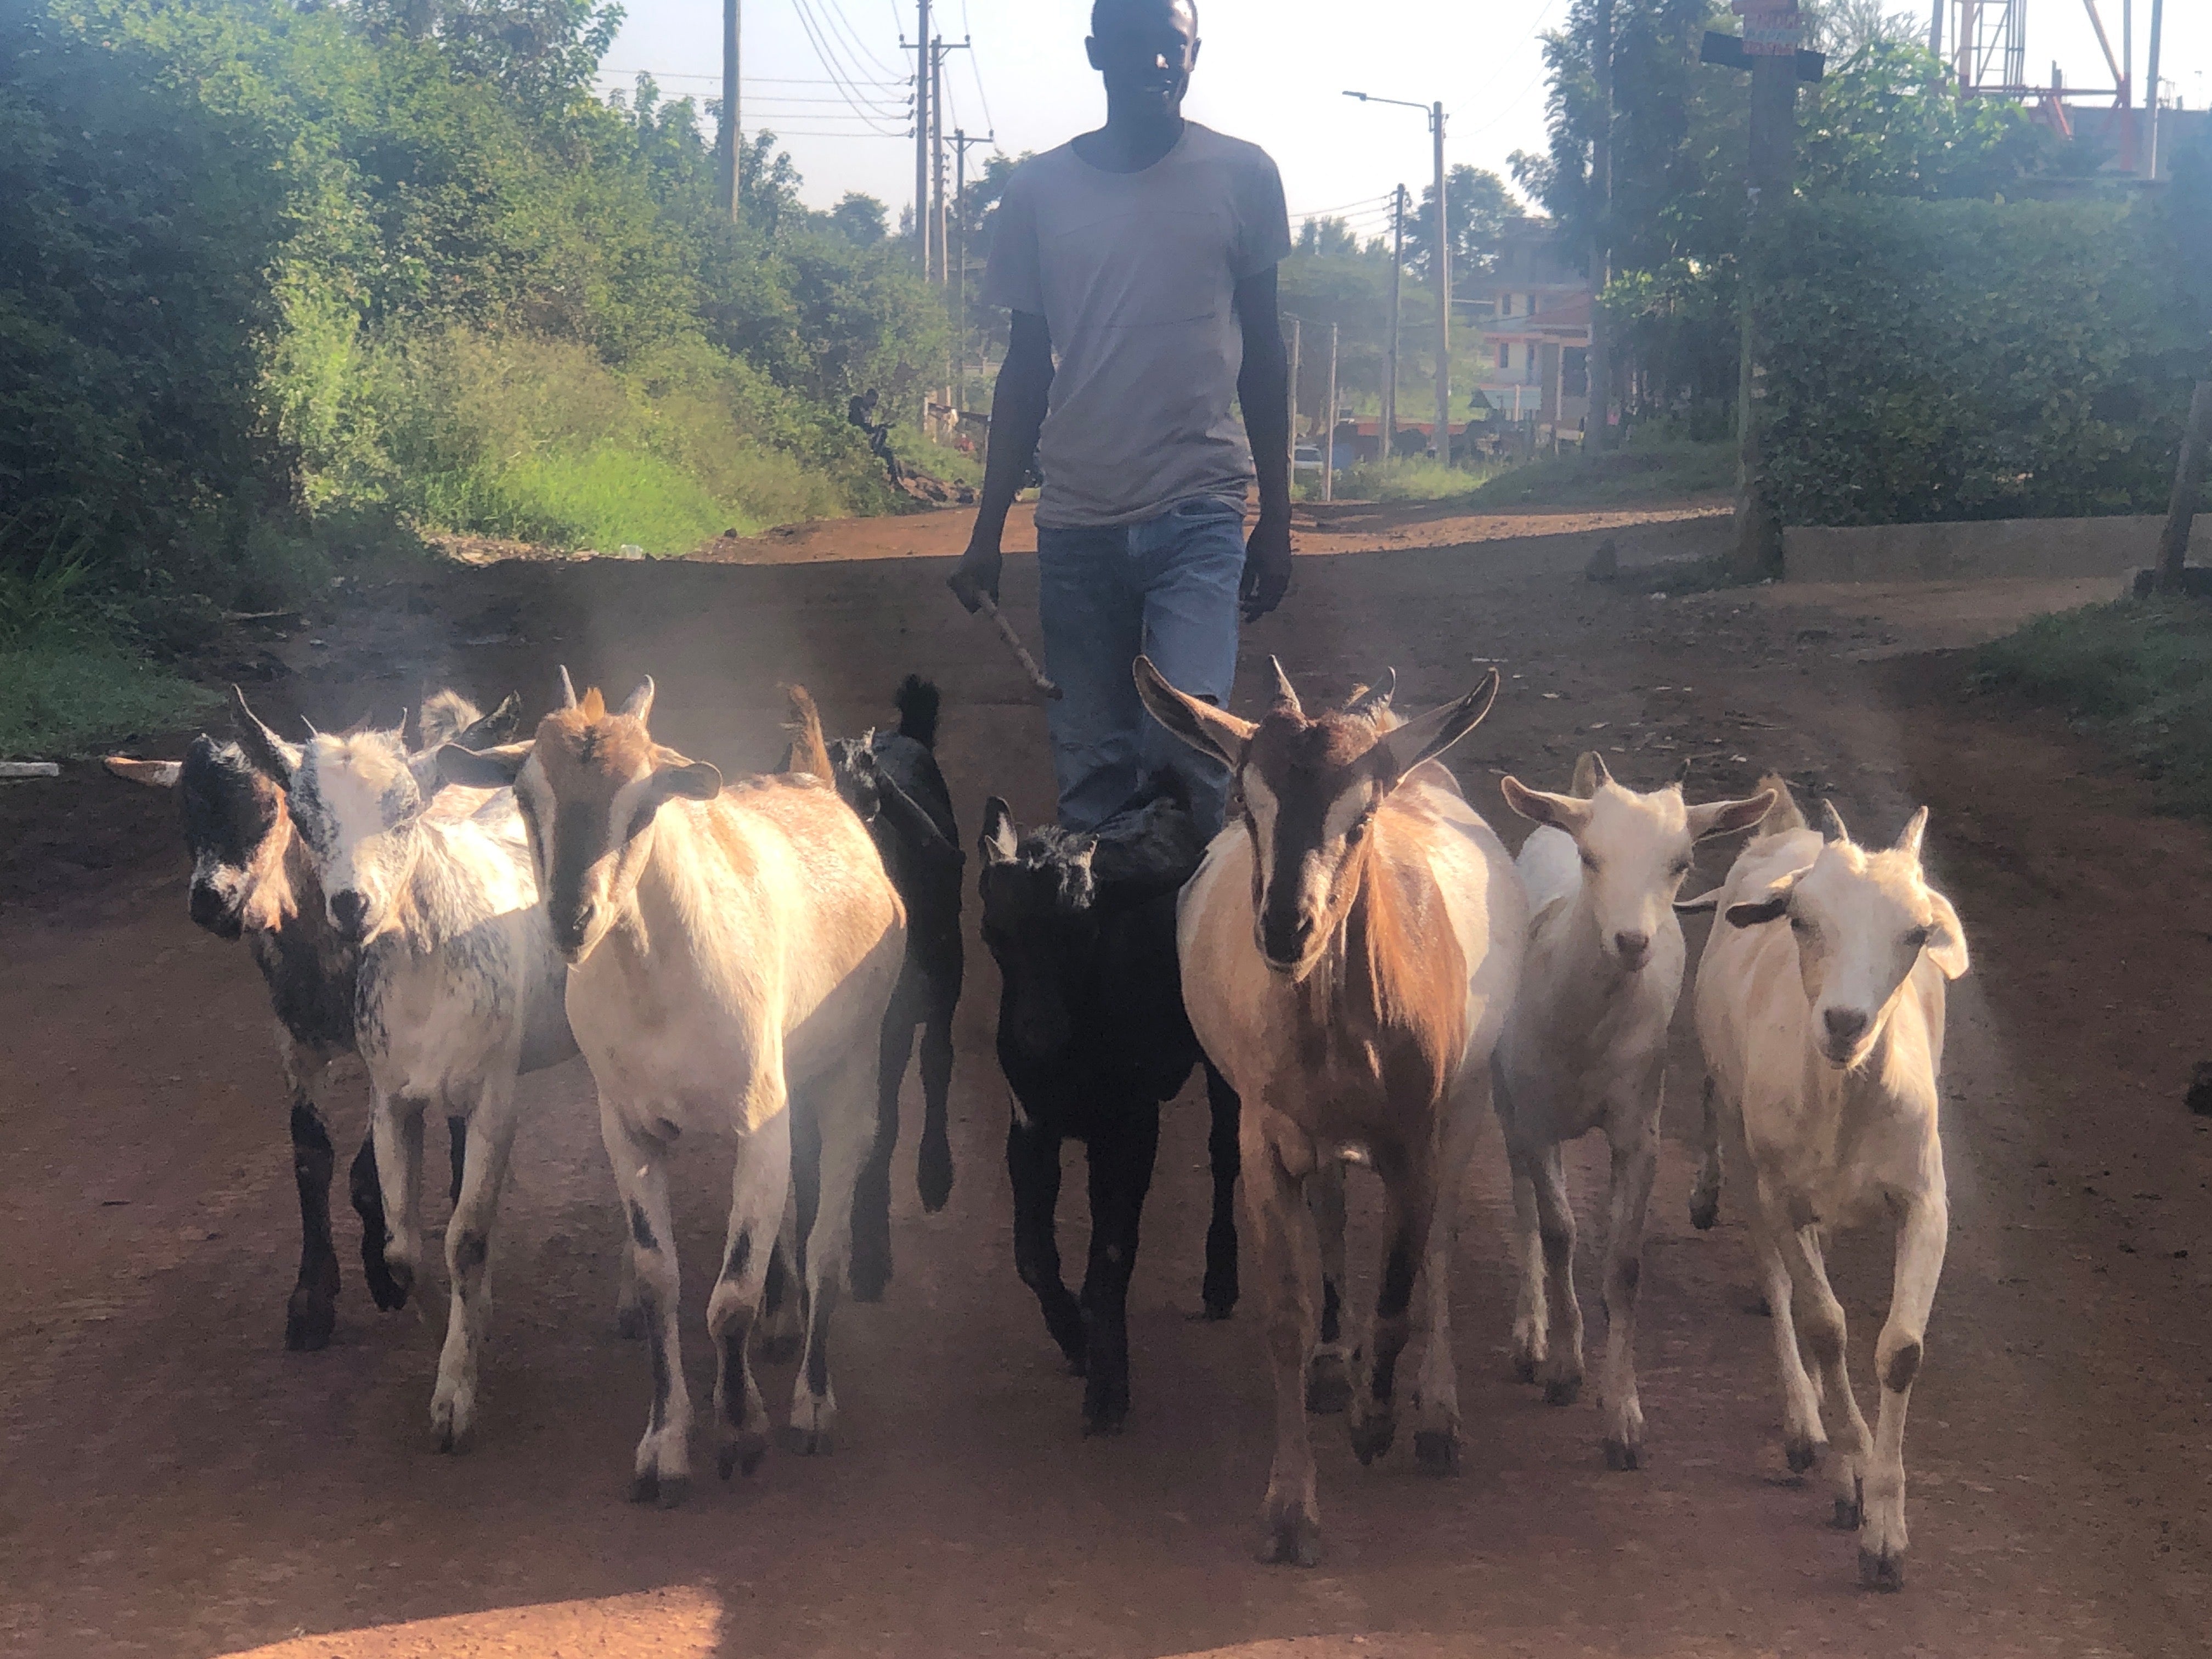 man herding a group of about 6 goats down a dirt road in Nairobi, Kenya